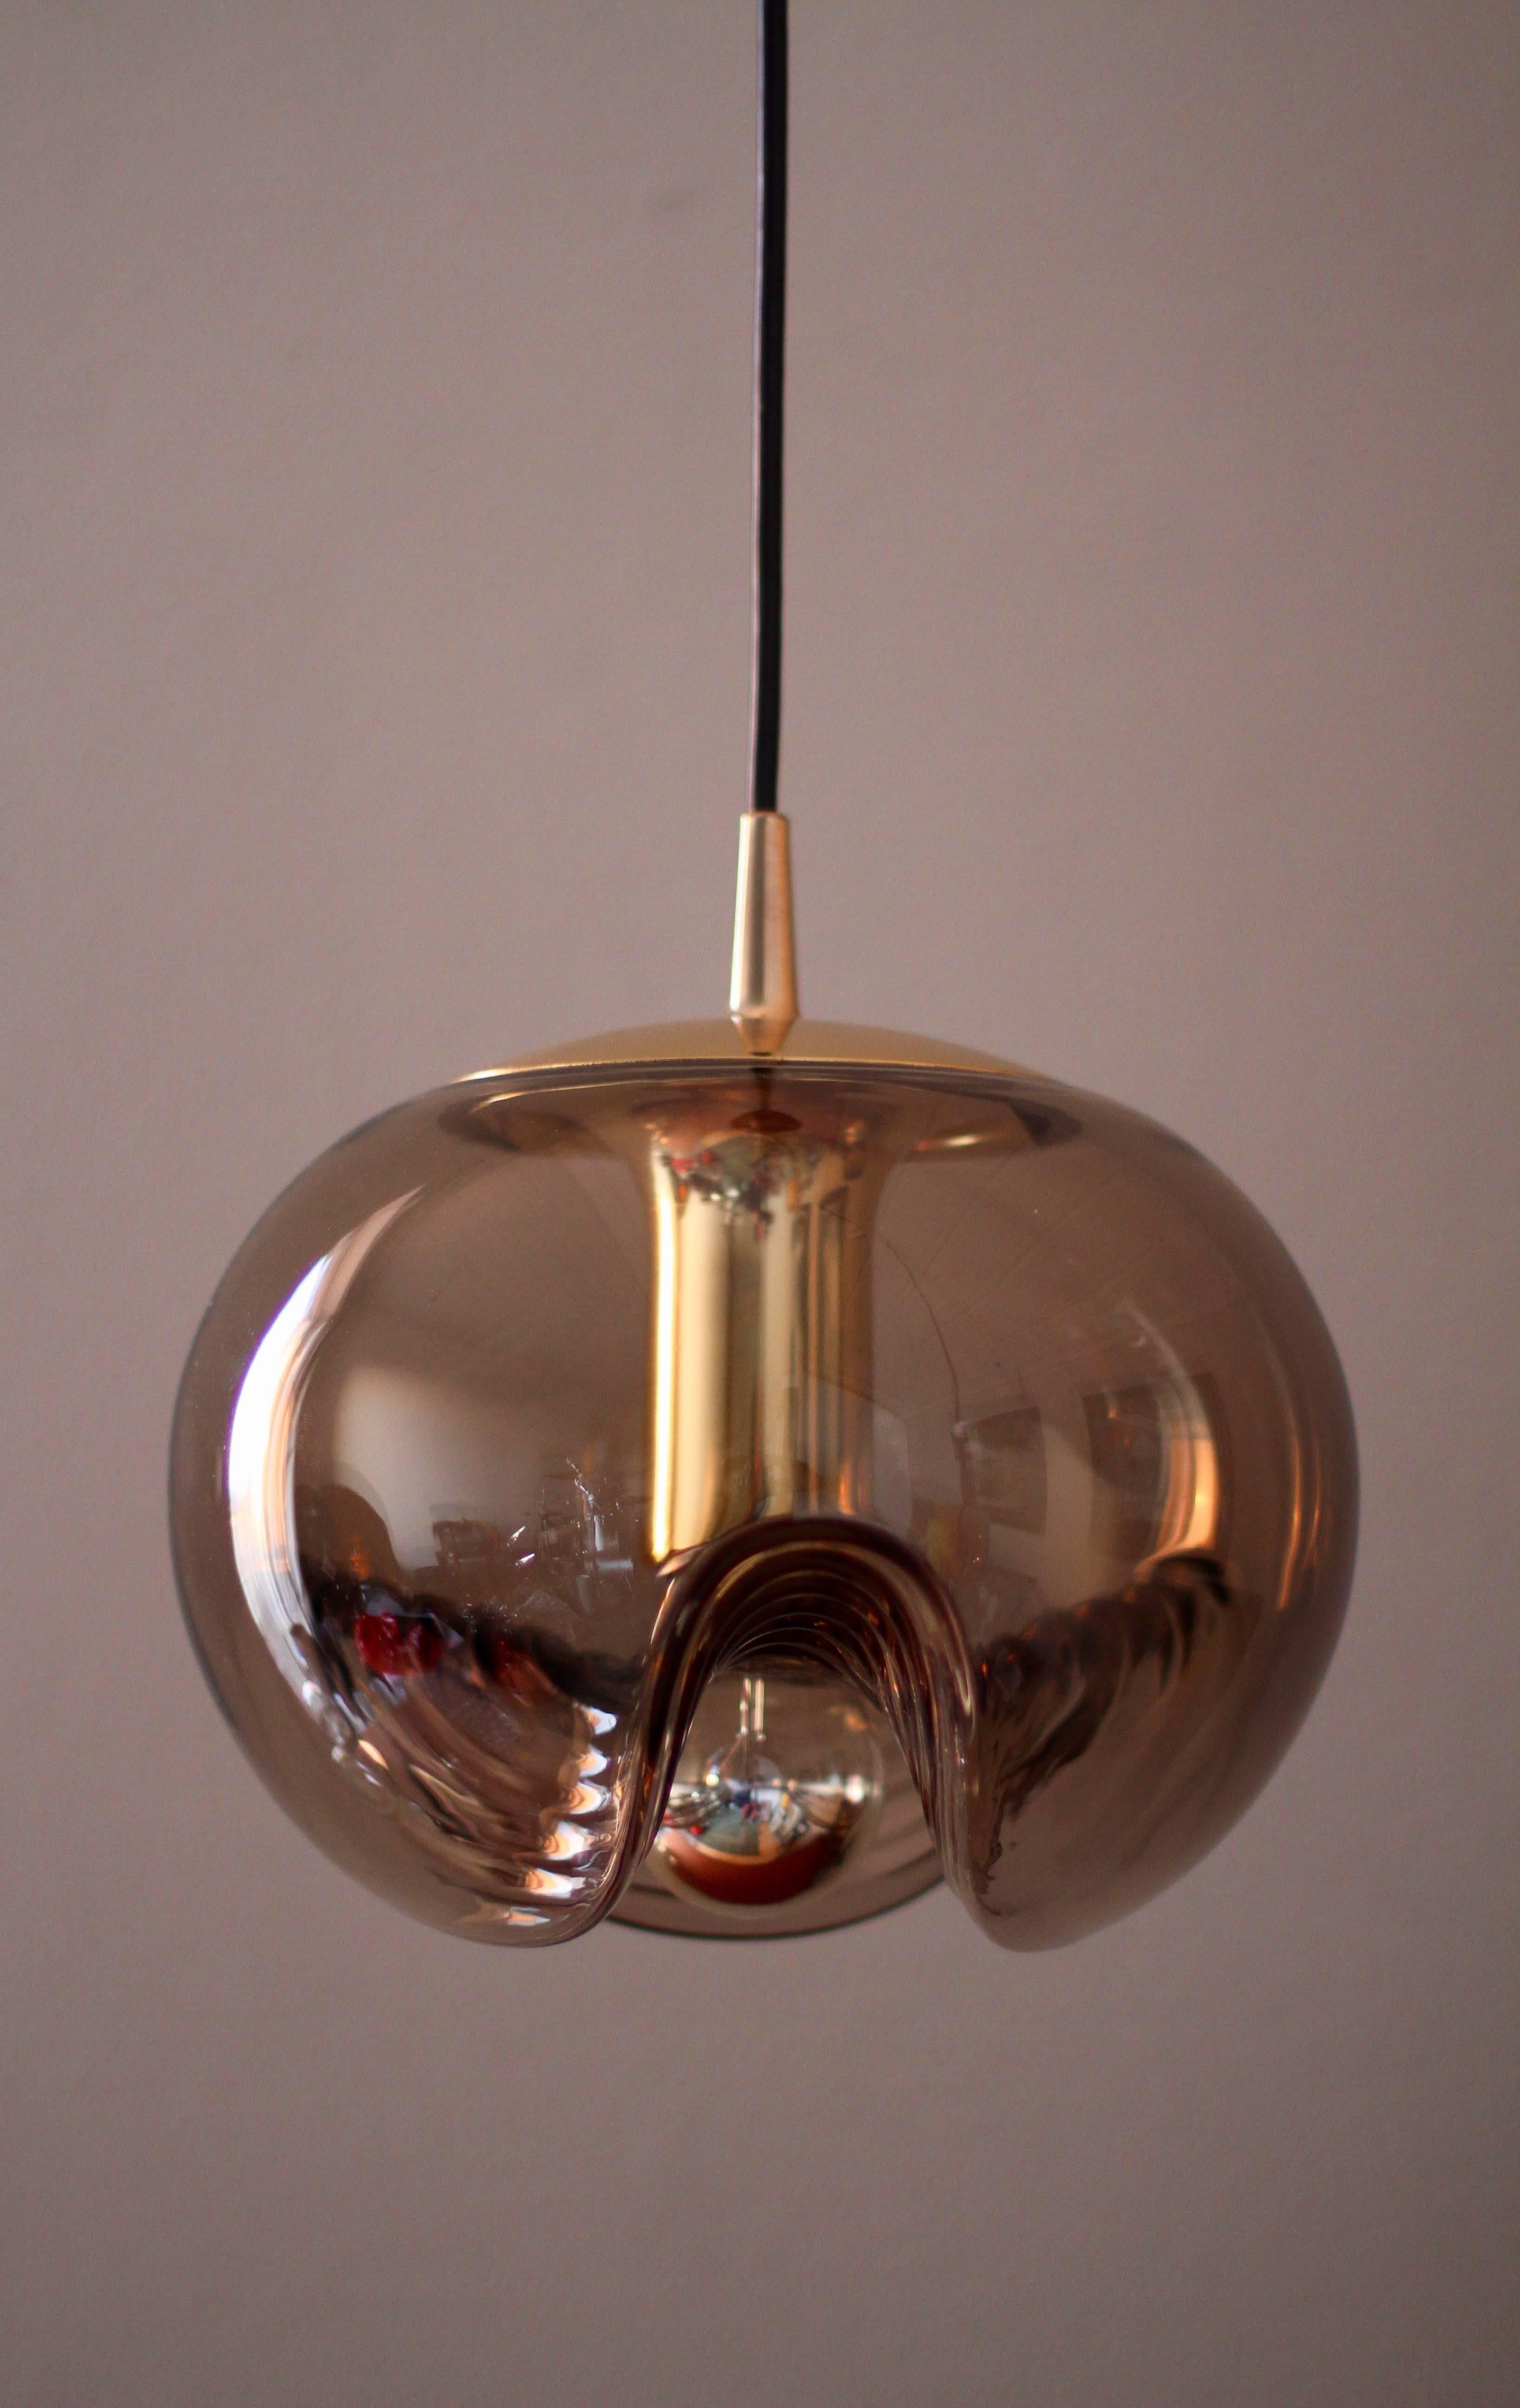 Beautiful Mid-Century design by Koch & Lowy for Peill & Putzler in the 1970s. This is an absolutely classic piece of design, featuring a smoked colored (colored) glass globe shade with a waved / ribbed moulded bubble form - casting a